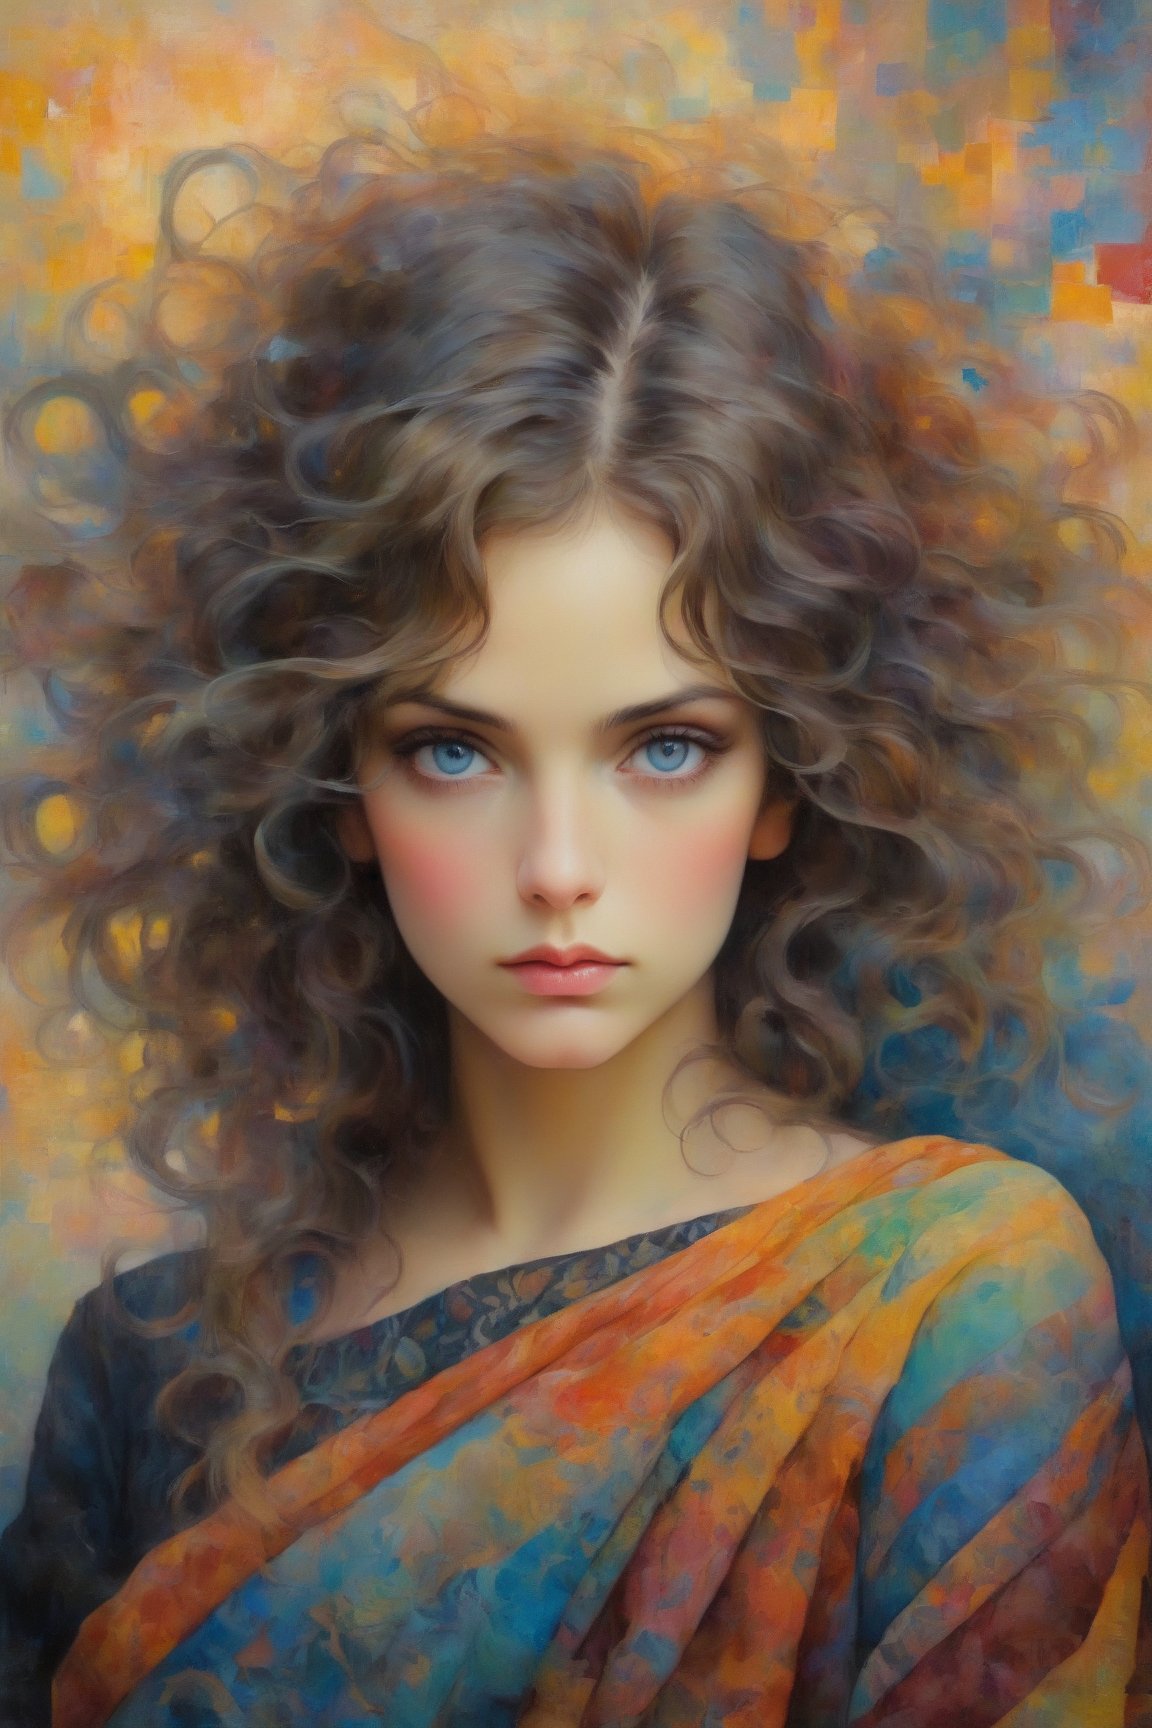 A captivating painting of a bohemian woman partially portrayed in a semi-realistic, painterly style. Her figure is adorned with intricate patterns and vibrant colors, her eyes gazing intently outwards. Delicate brushstrokes bring life to the delicate details of her face and attire. The background is a mesmerizing abstract painting of swirling colors and textures, subtly merging with the subject's attire. This enchanting illustration creates a dreamy, surreal atmosphere that draws the viewer into a world of fantasy and wonder., illustration, painting